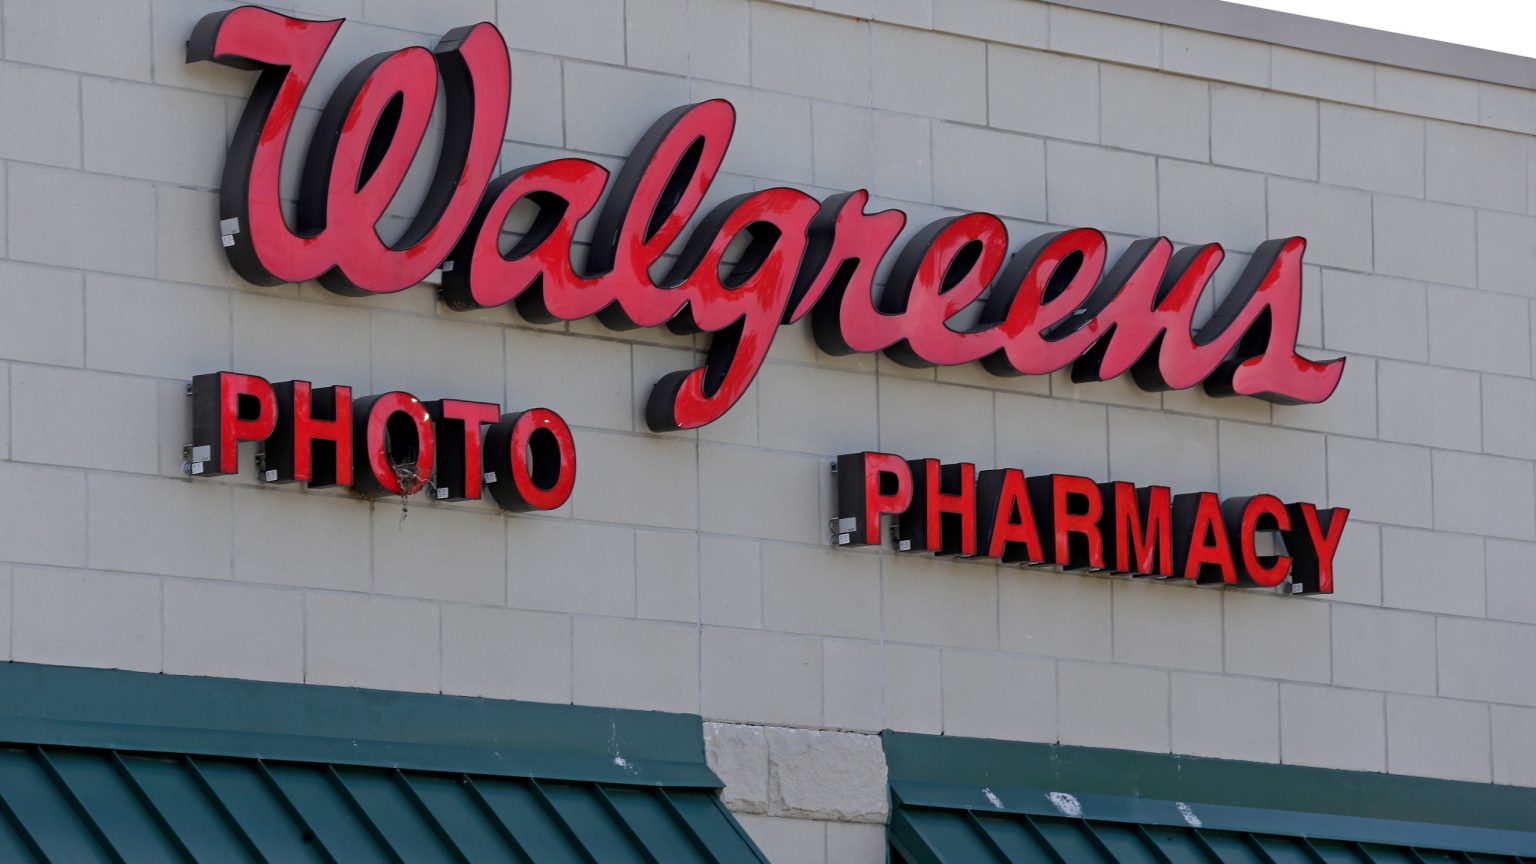 Free 8X10 At Walgreens! I Pay With Coupons